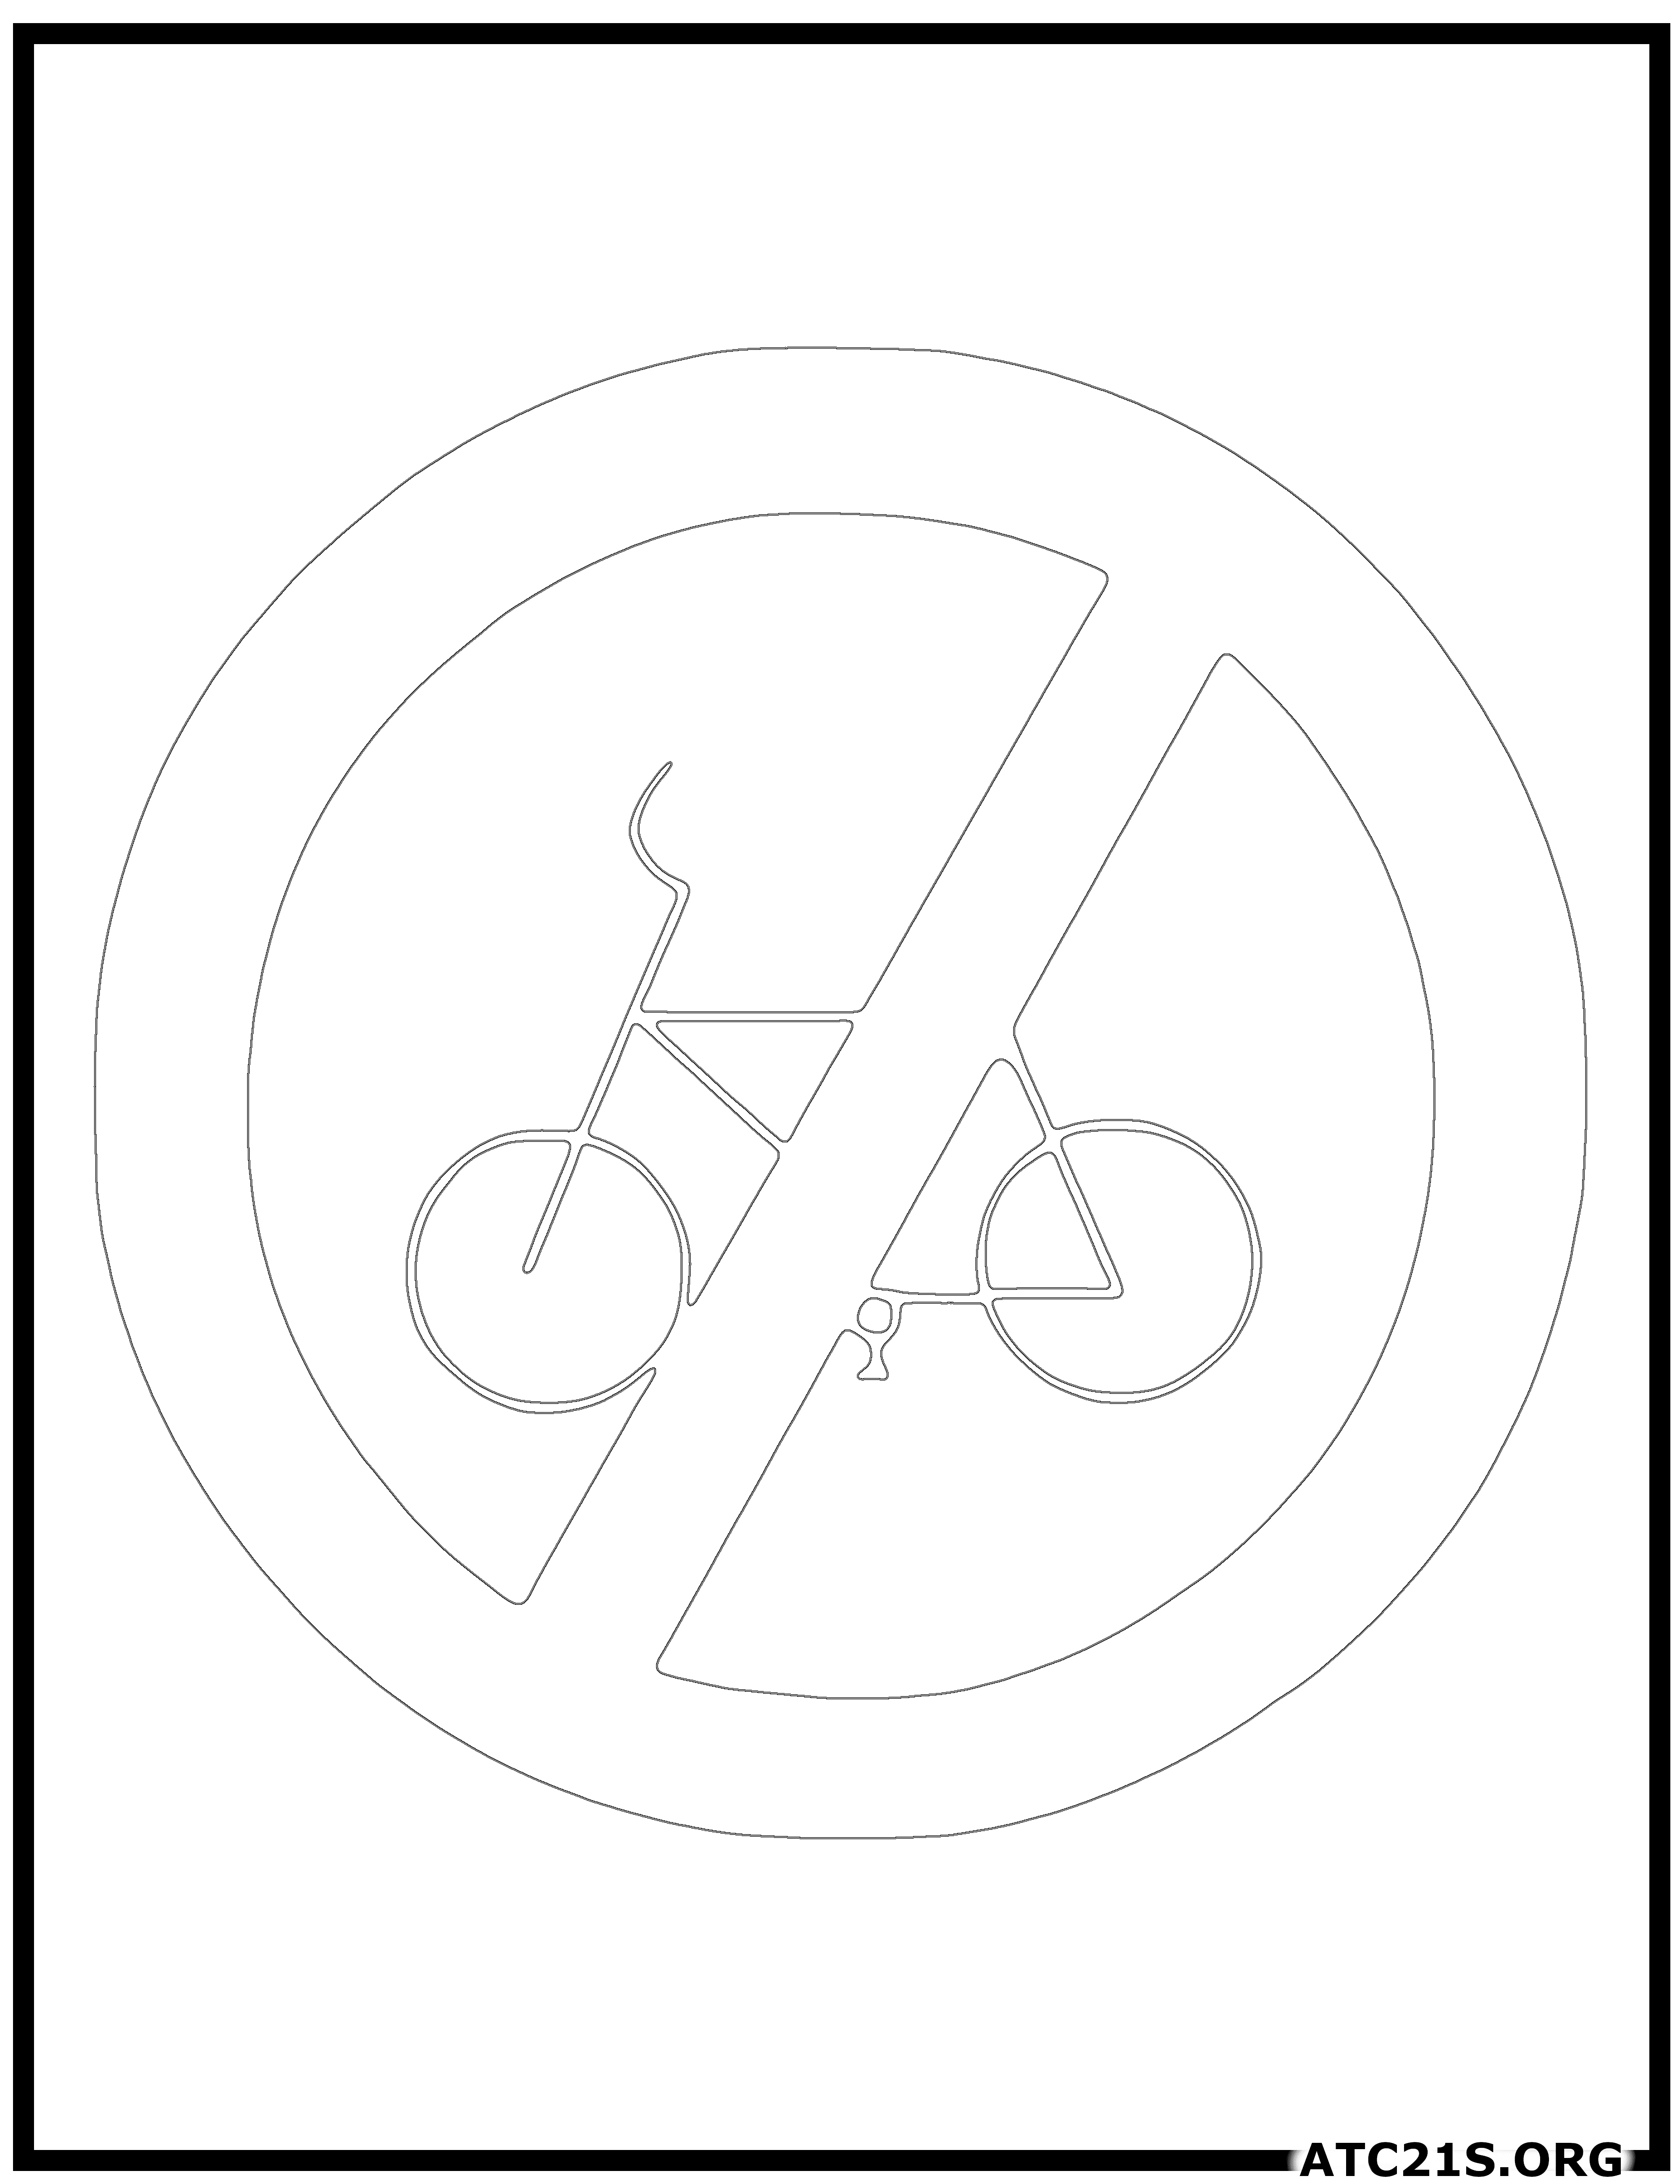 Cycles-prohibited-traffic-sign-coloring-page